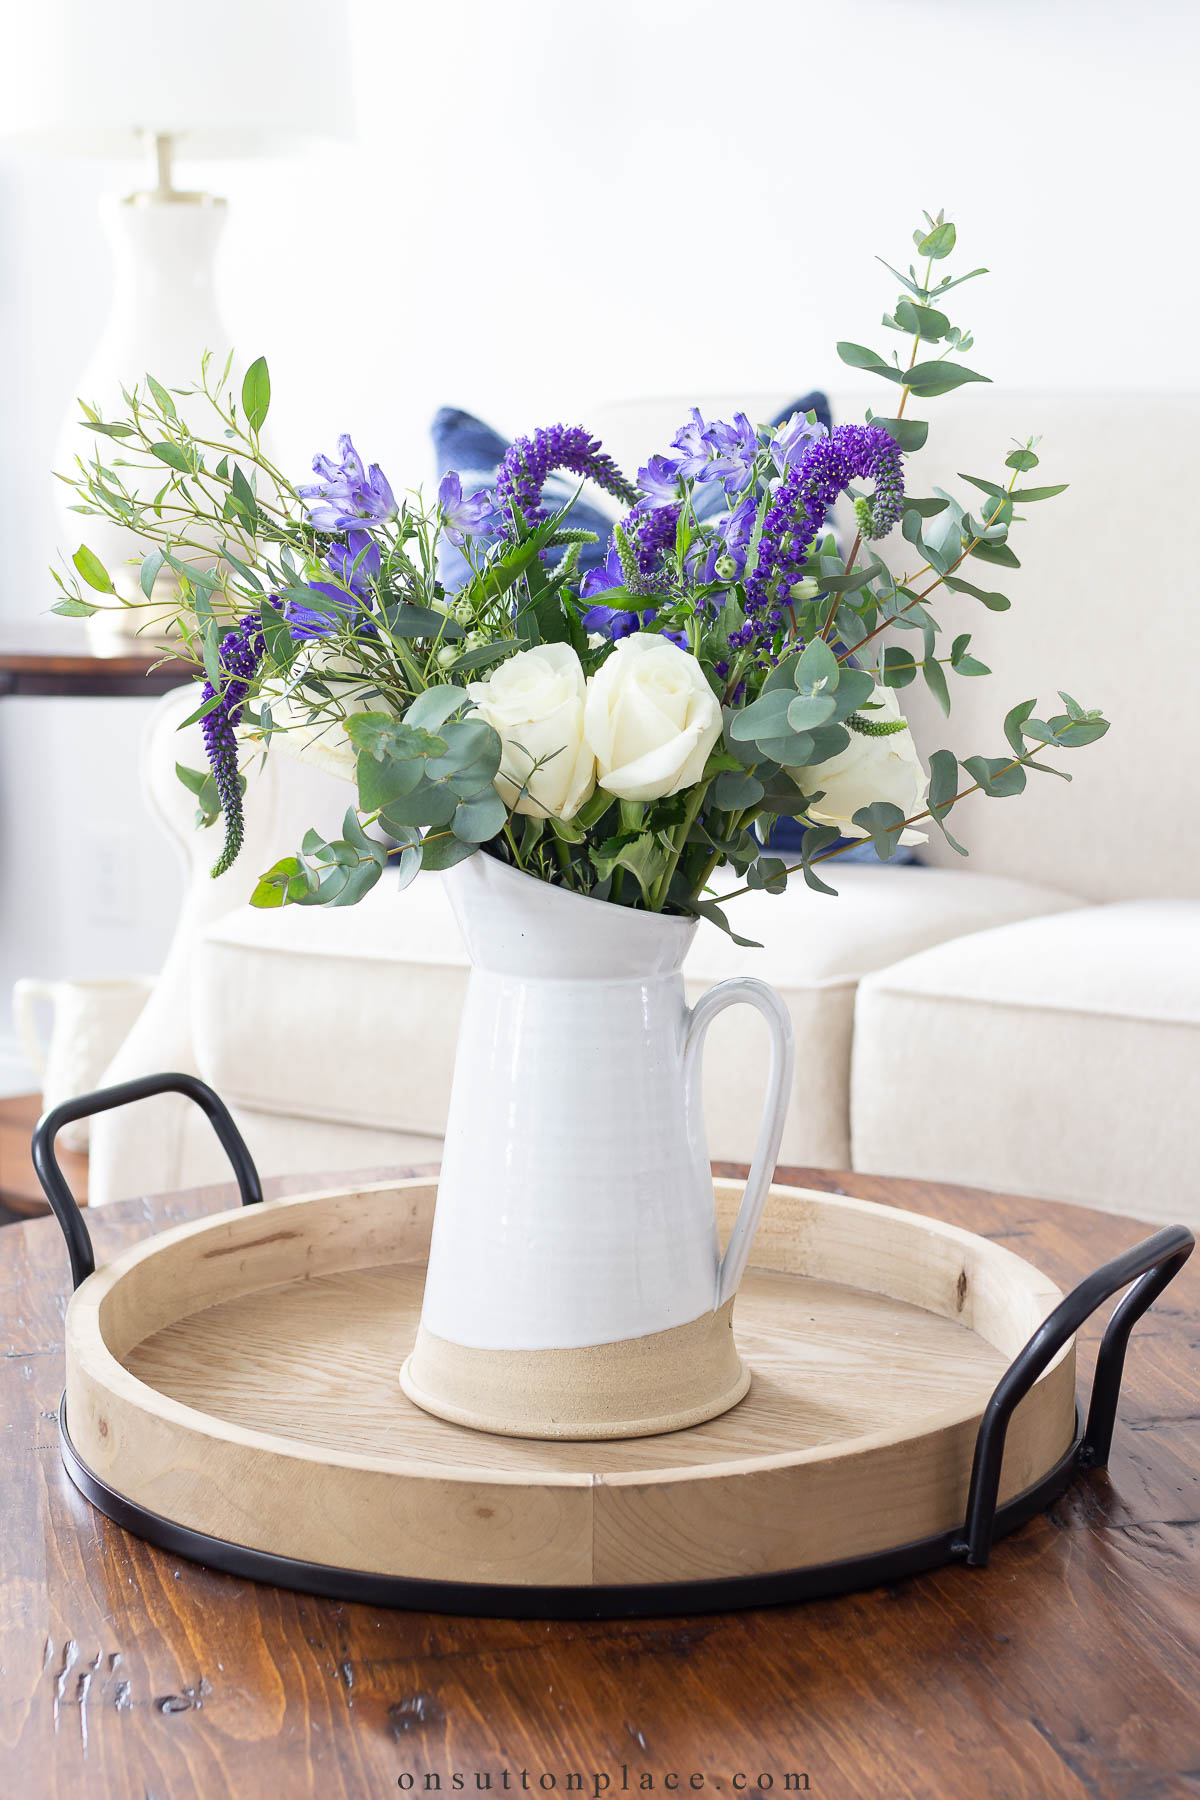 https://www.onsuttonplace.com/wp-content/uploads/2023/01/pitcher-of-flowers-on-round-tray.jpg